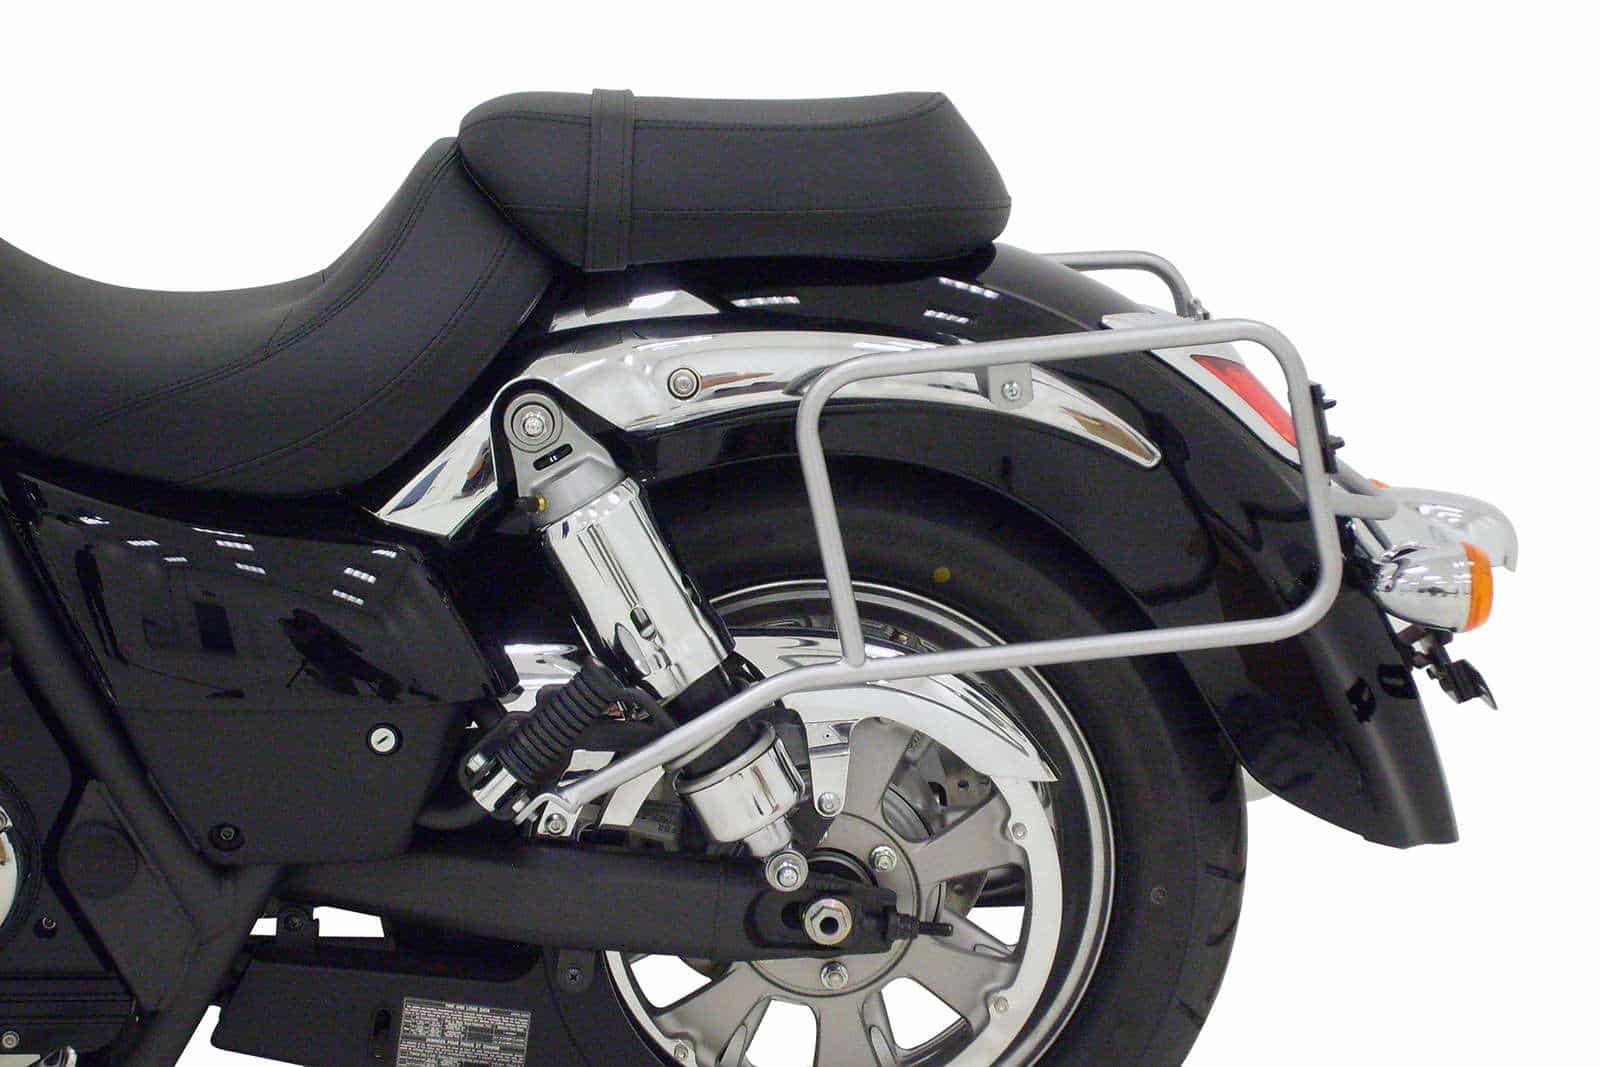 Sidecarrier permanent mounted chrome for Kawasaki VN 1700 Classic (2009-2014)